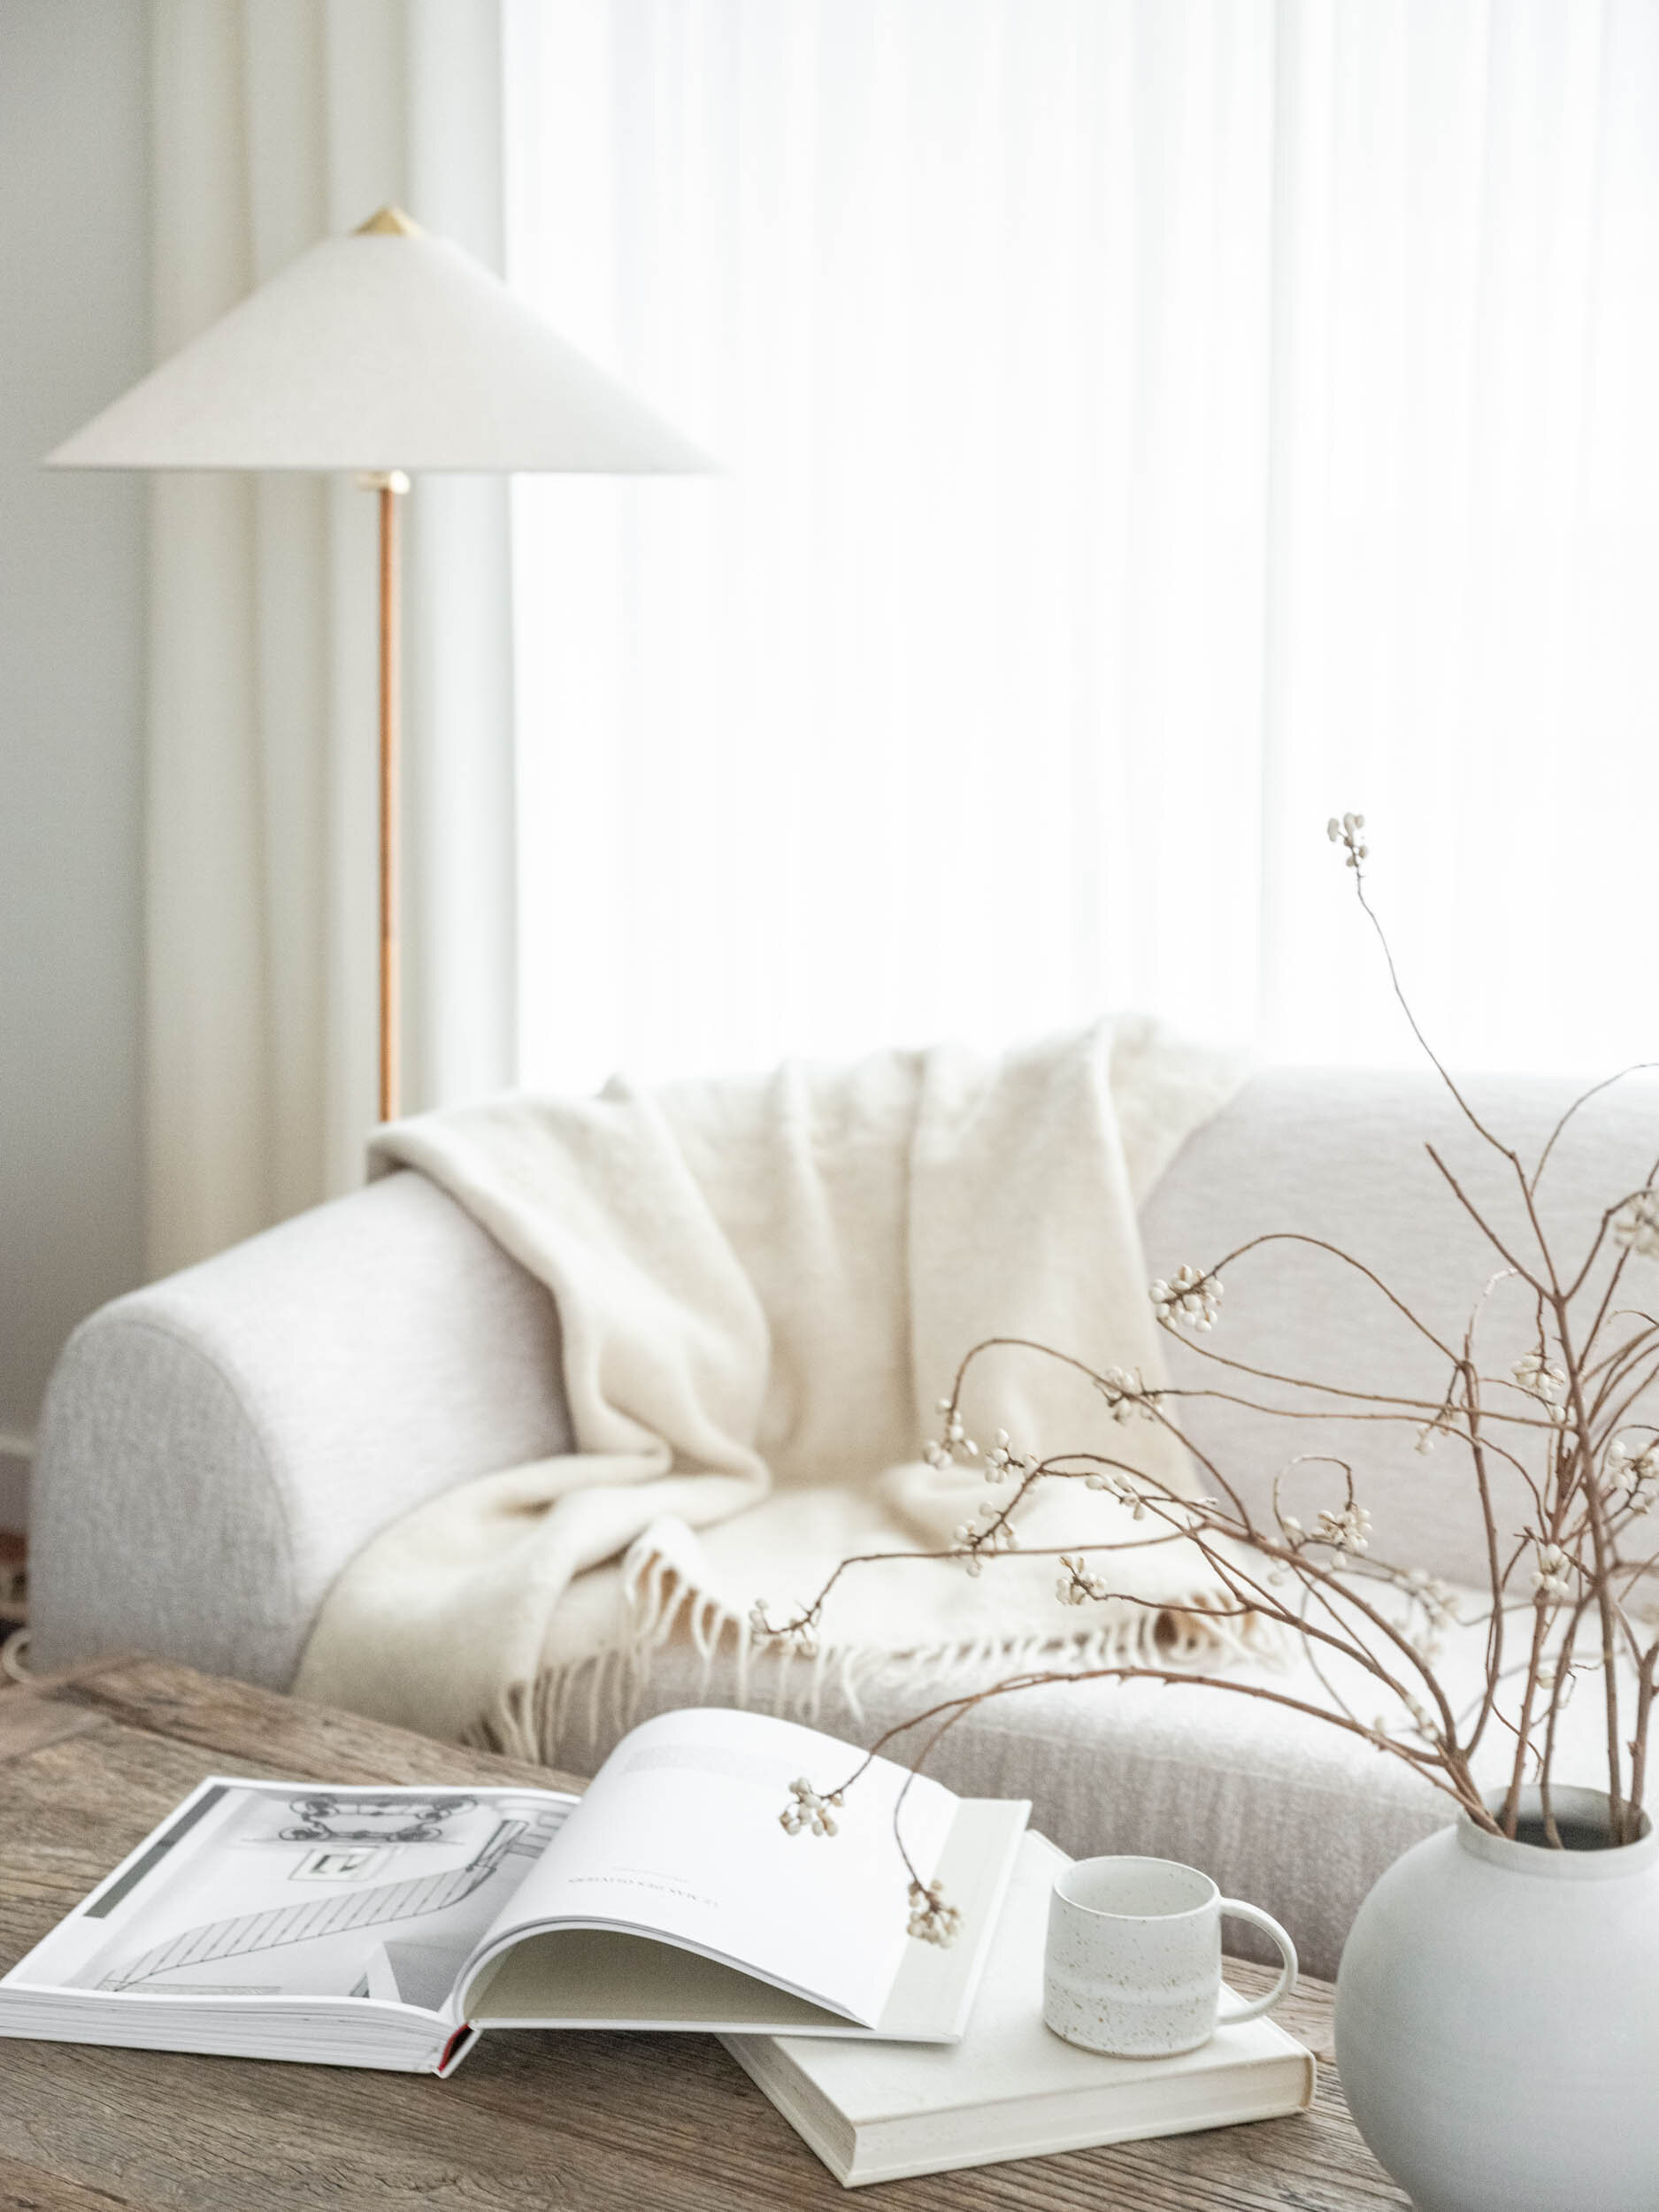 soothing white textural decor elements